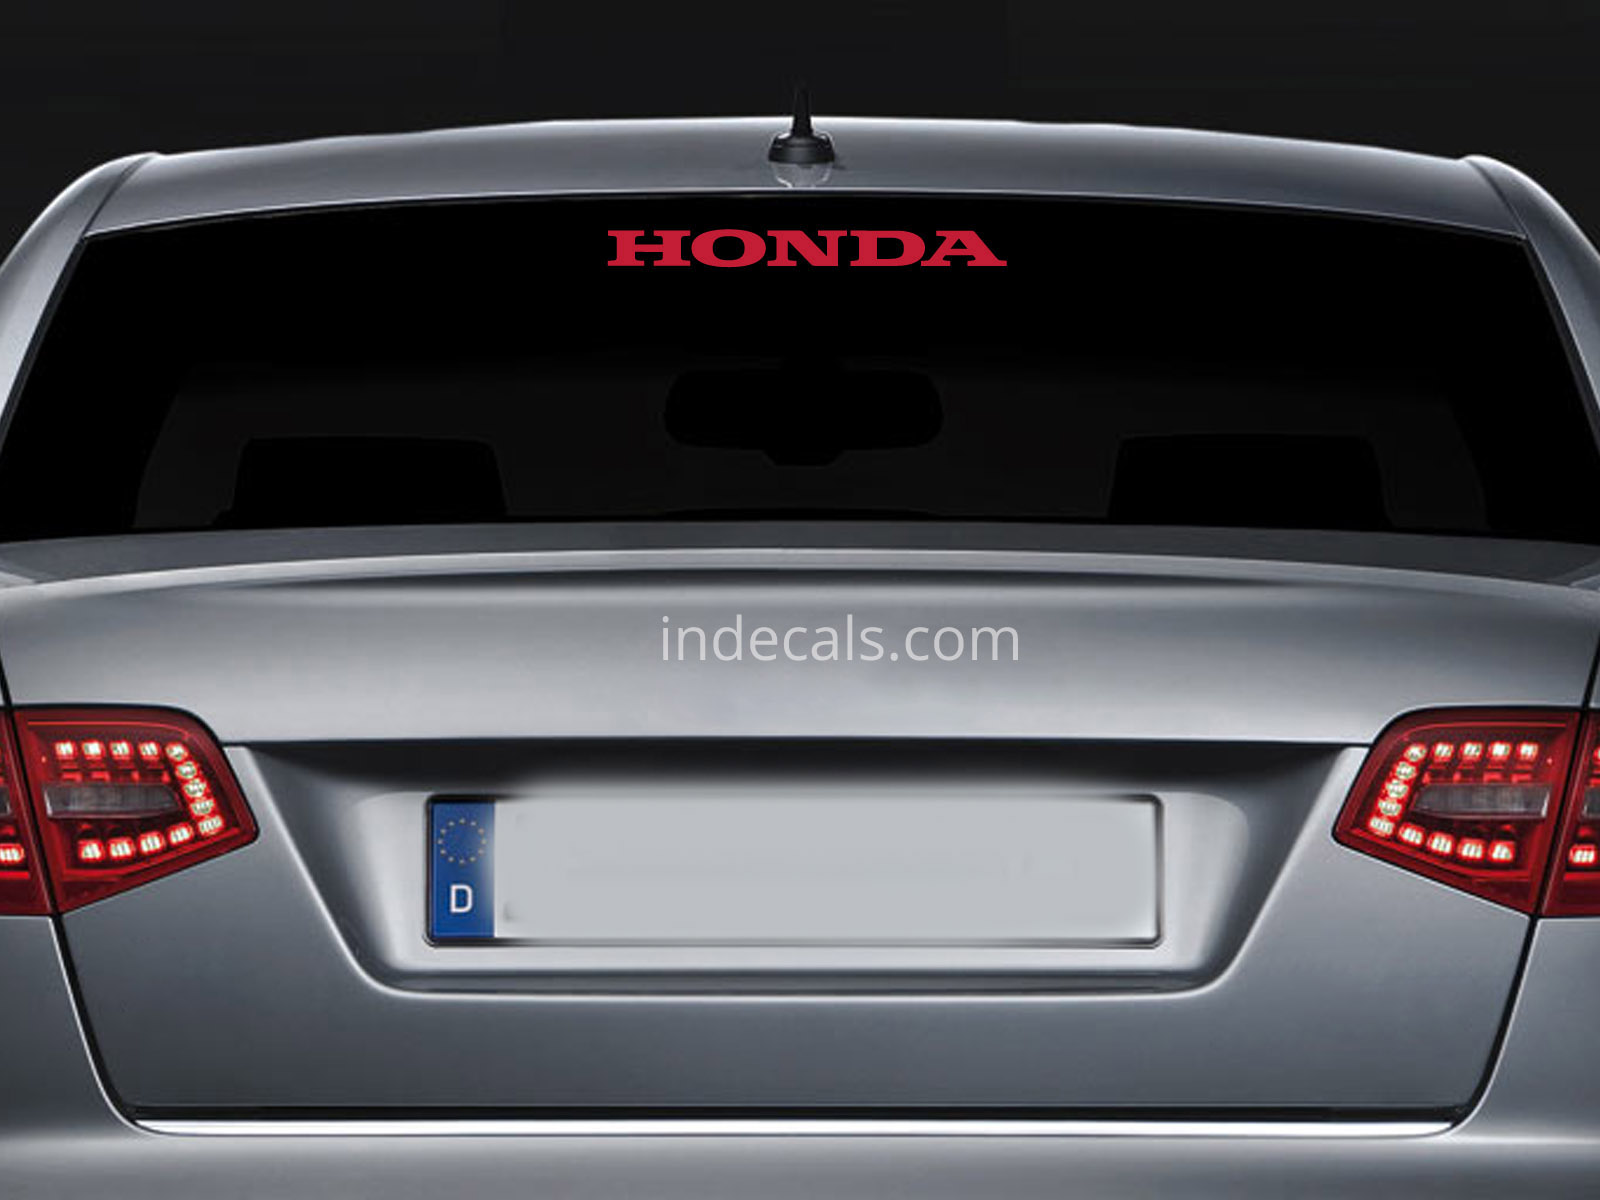 1 x Honda Sticker for Windshield or Back Window - Red